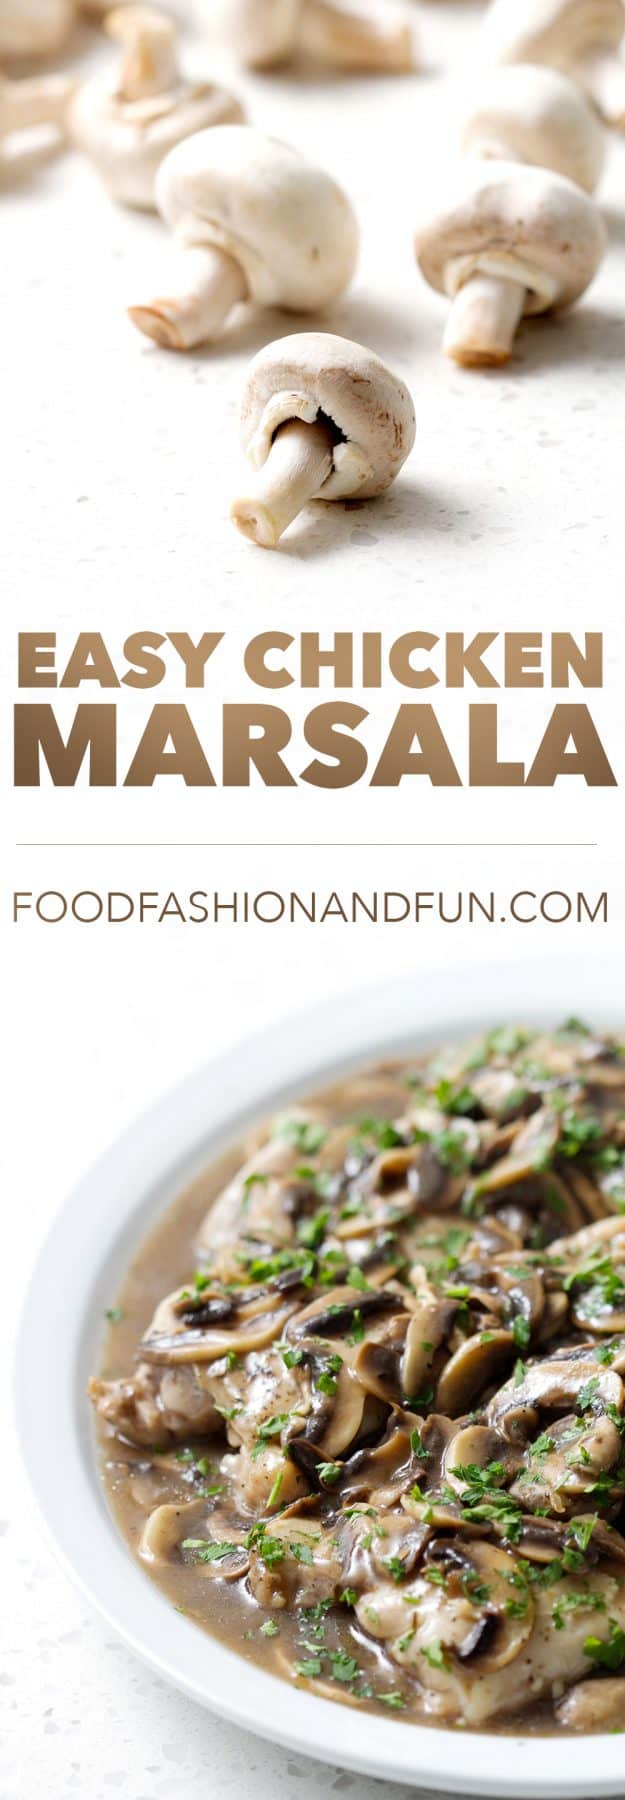 This easy Chicken Marsala recipe is made in one pan in less than thirty minutes! Traditionally this Italian American dish is made butter and breaded chicken. To make this dairy and gluten free, I’ve used olive oil and skipped the flour altogether. This recipe is allergy friendly (gluten, dairy, shellfish, nut, egg, and soy free) and suits the autoimmune protocol and paleo diets.